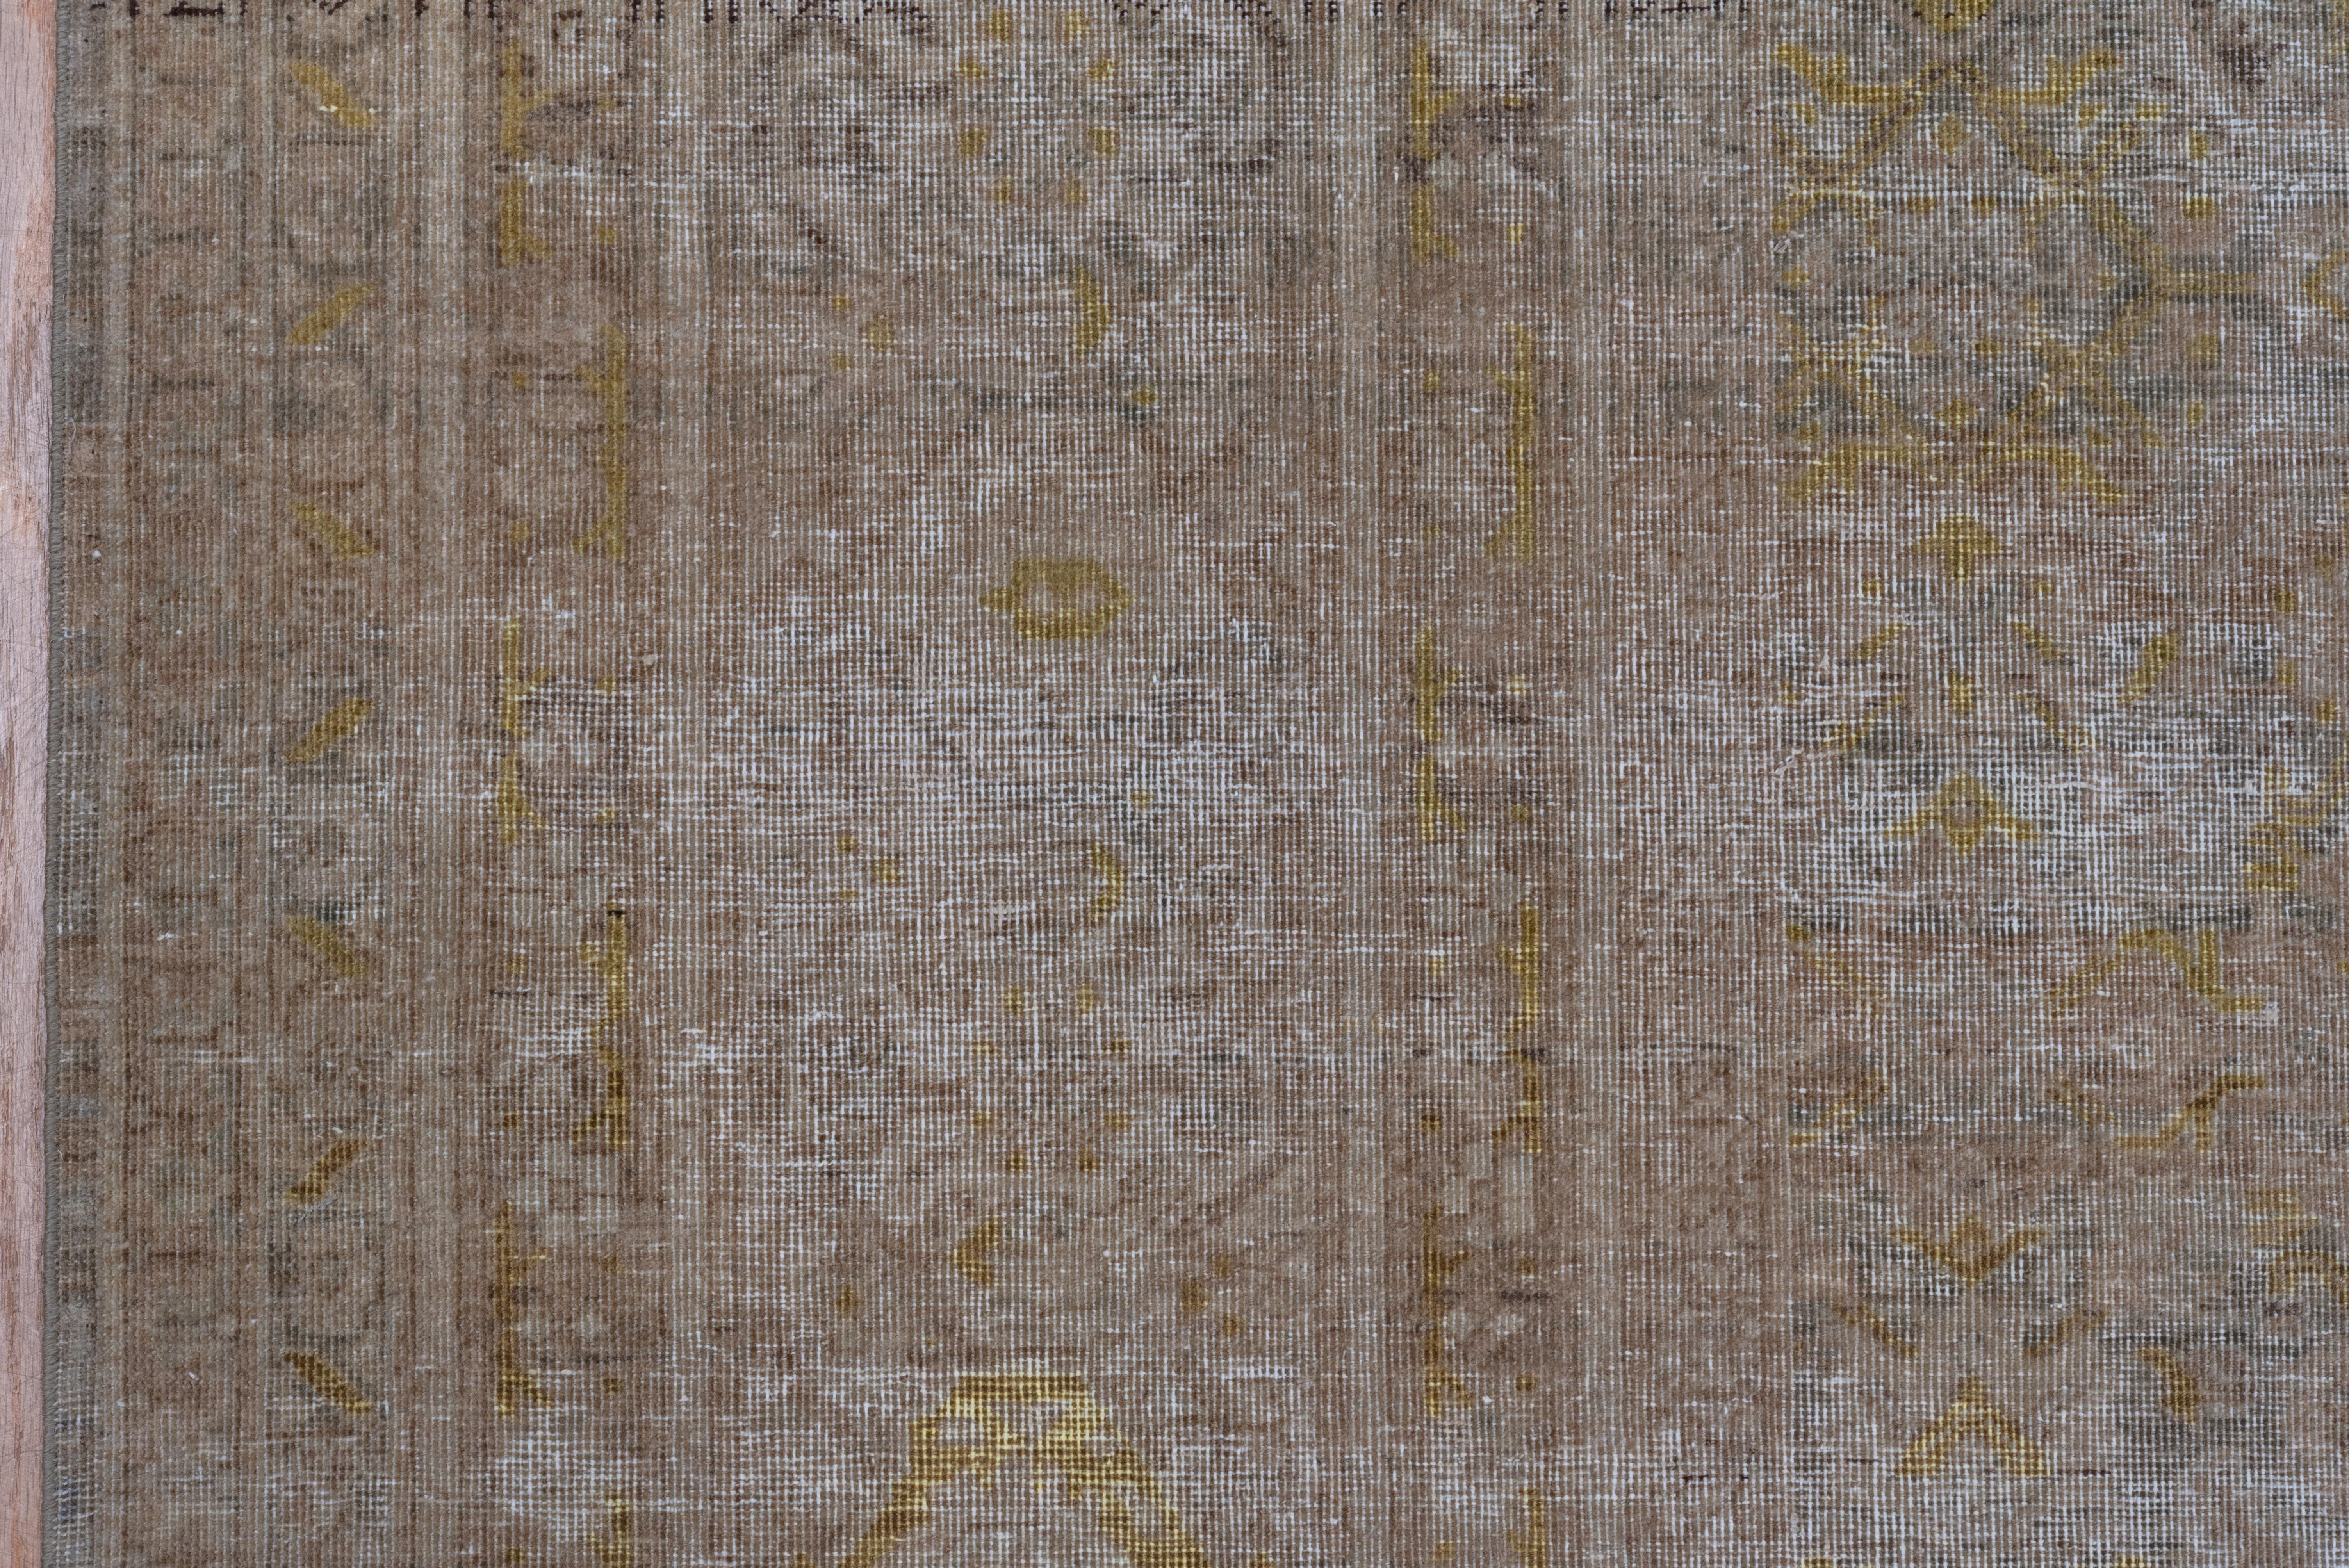 The very light brown taupe field shows an all-over Herati pattern in the Persian Tabriz manner. The main border shows reversing turtle palmettes with yellow detailing. A few partial lines of darker abrash. Fair condition. Gold, electric yellow